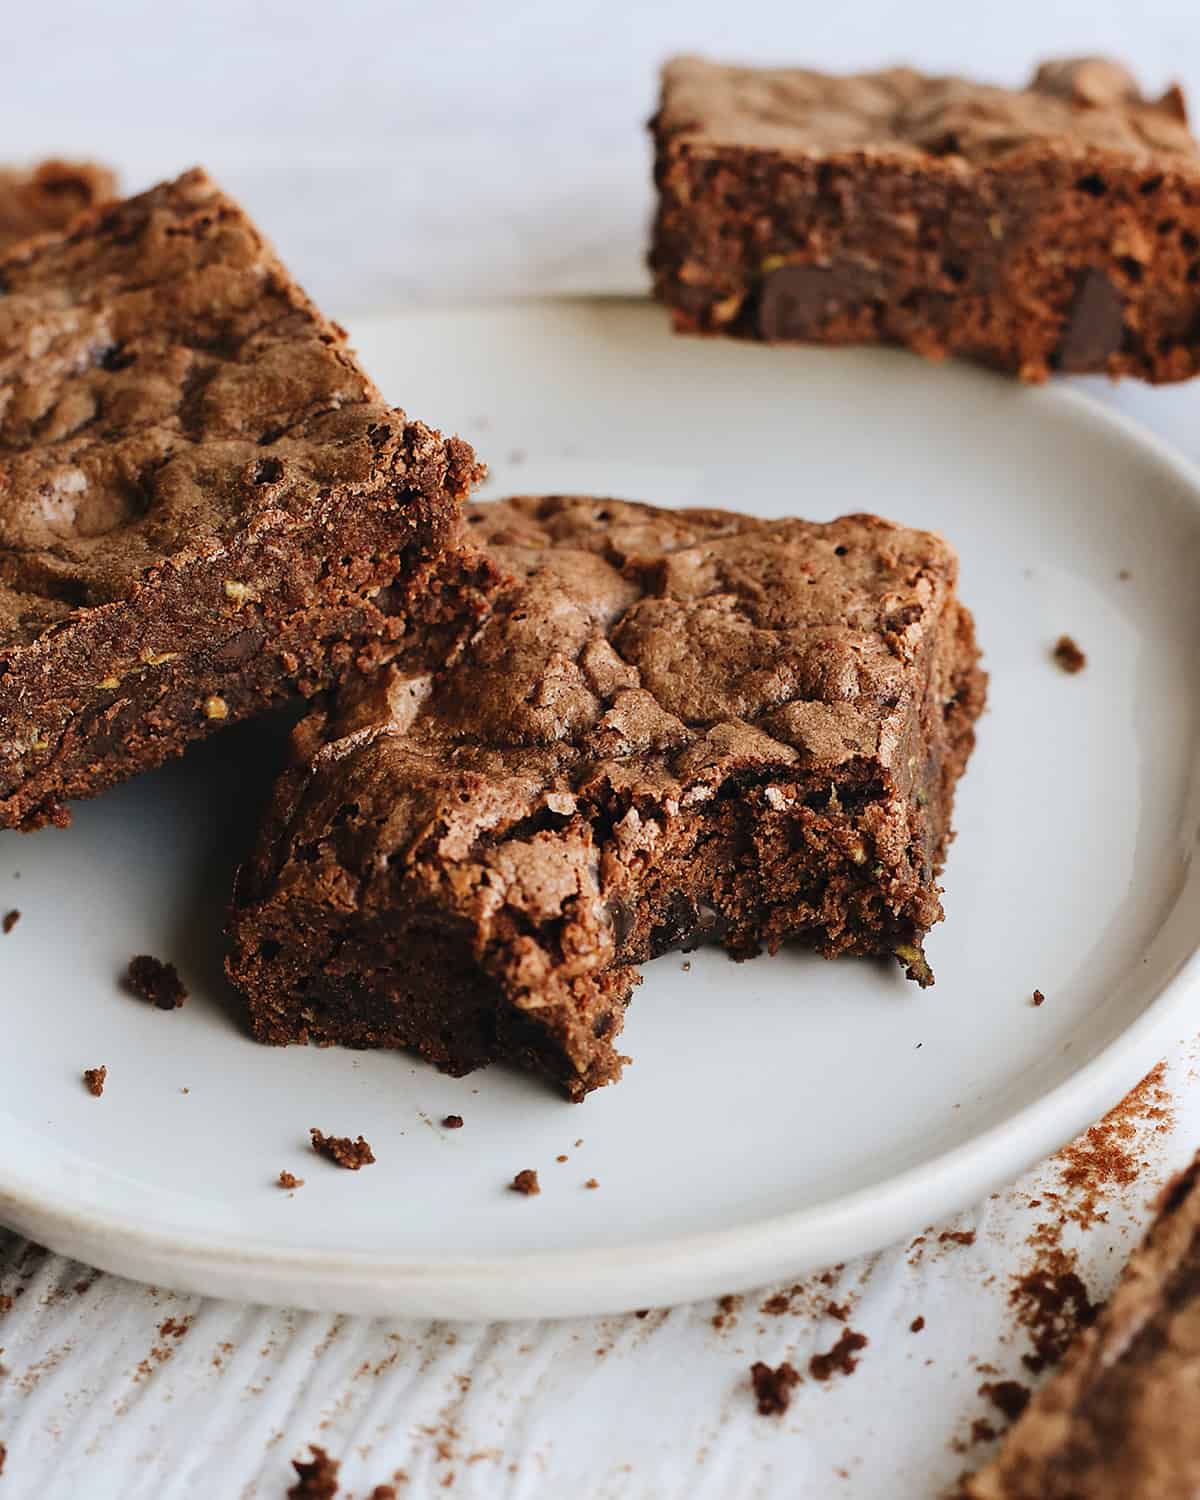 two chocolate zucchini brownies on a plate, one with a bite taken out of it